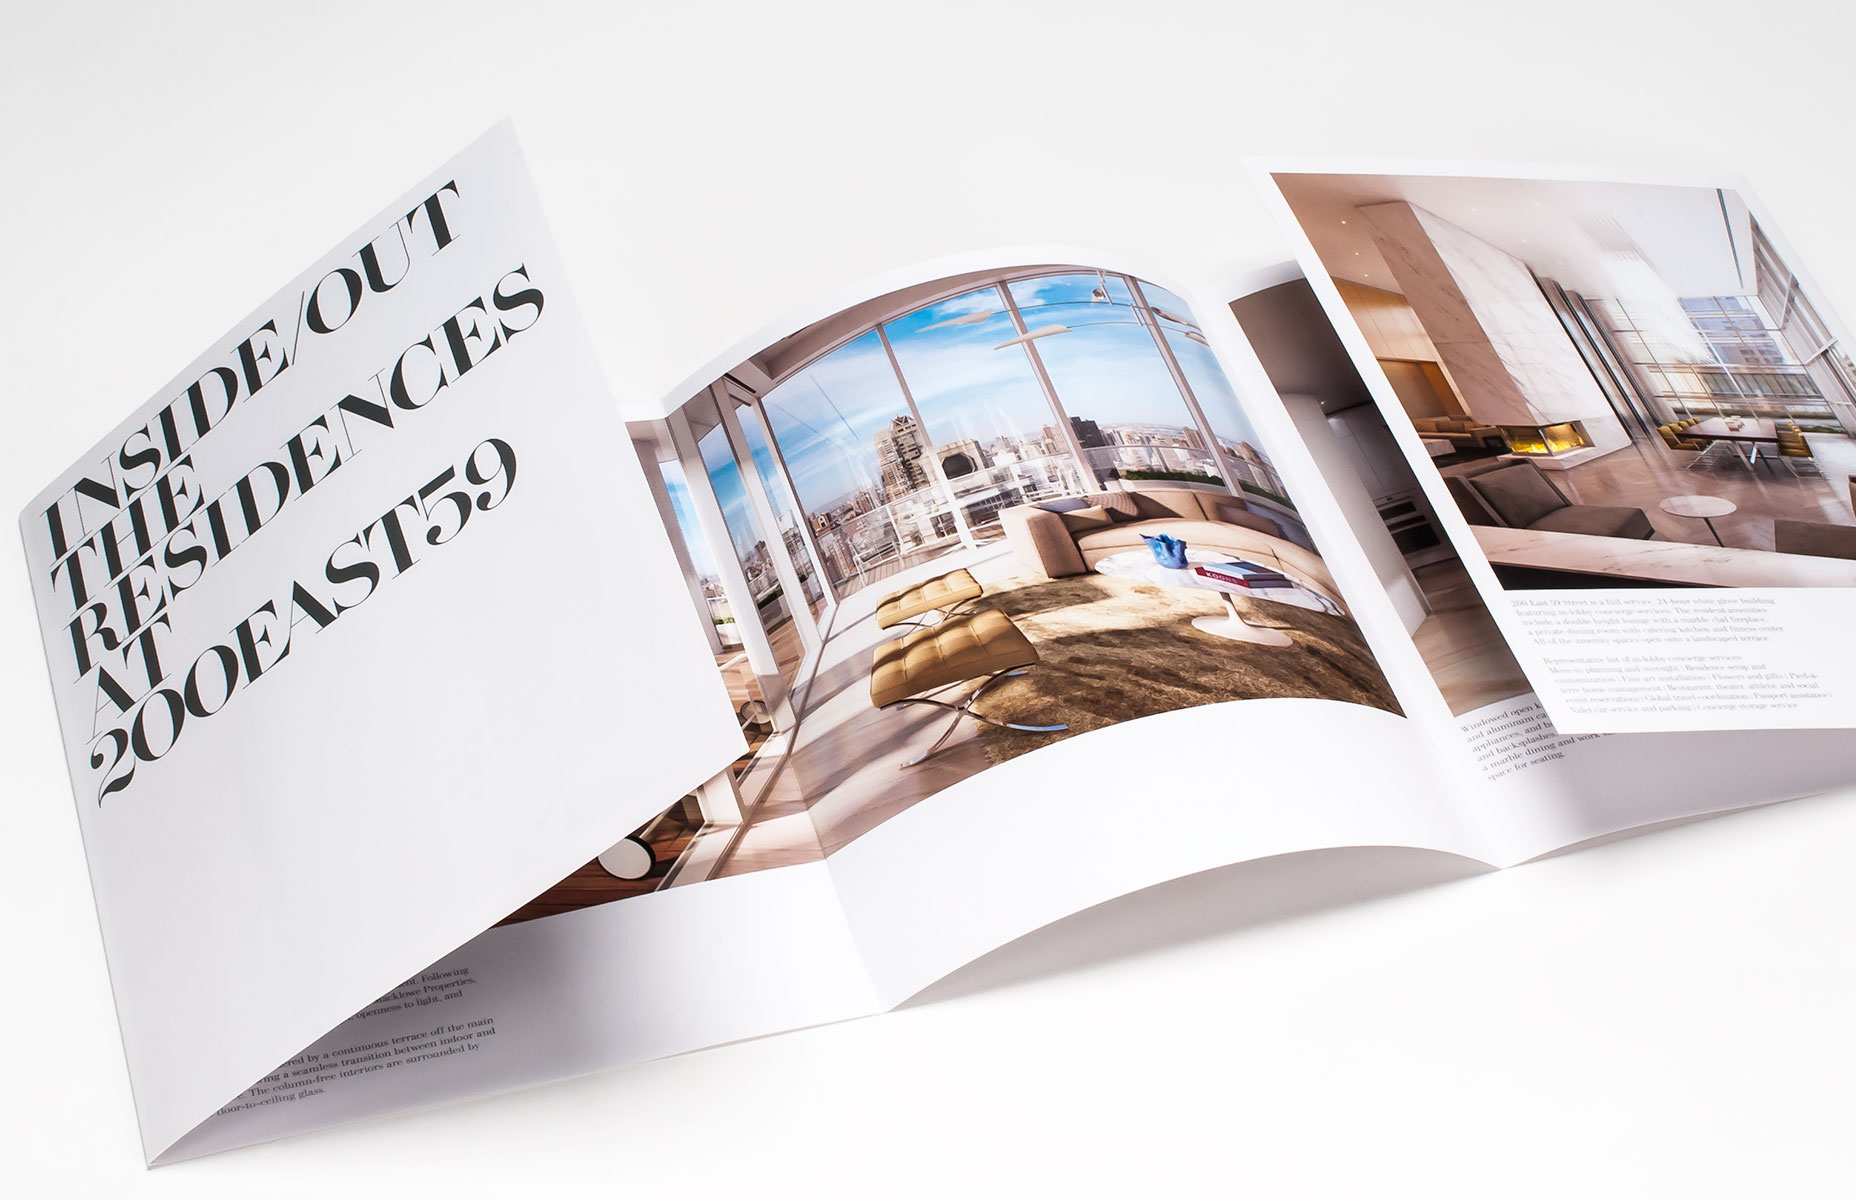 Inside/Out: The Residences at 200 East 59 real estate pamphlet for Macklowe Properties.